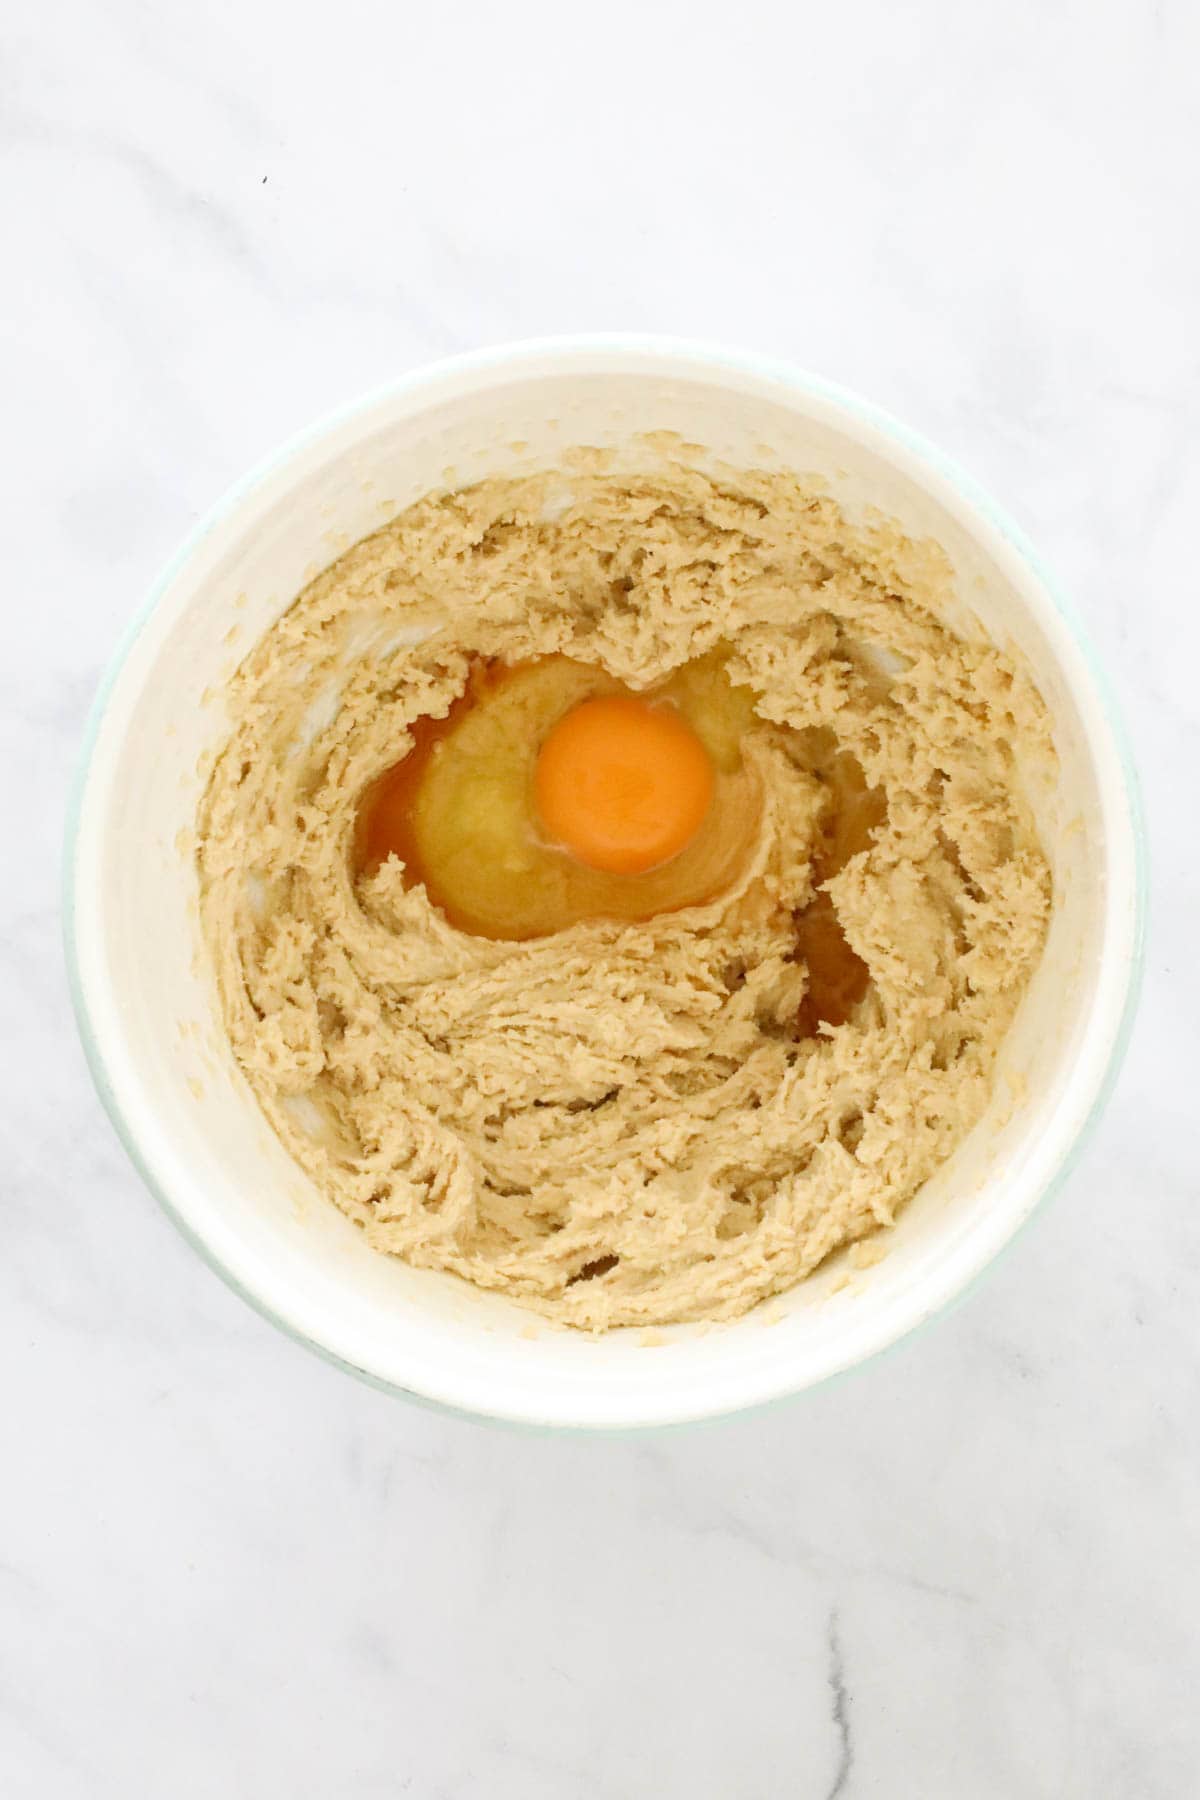 An egg added to creamed mixture.